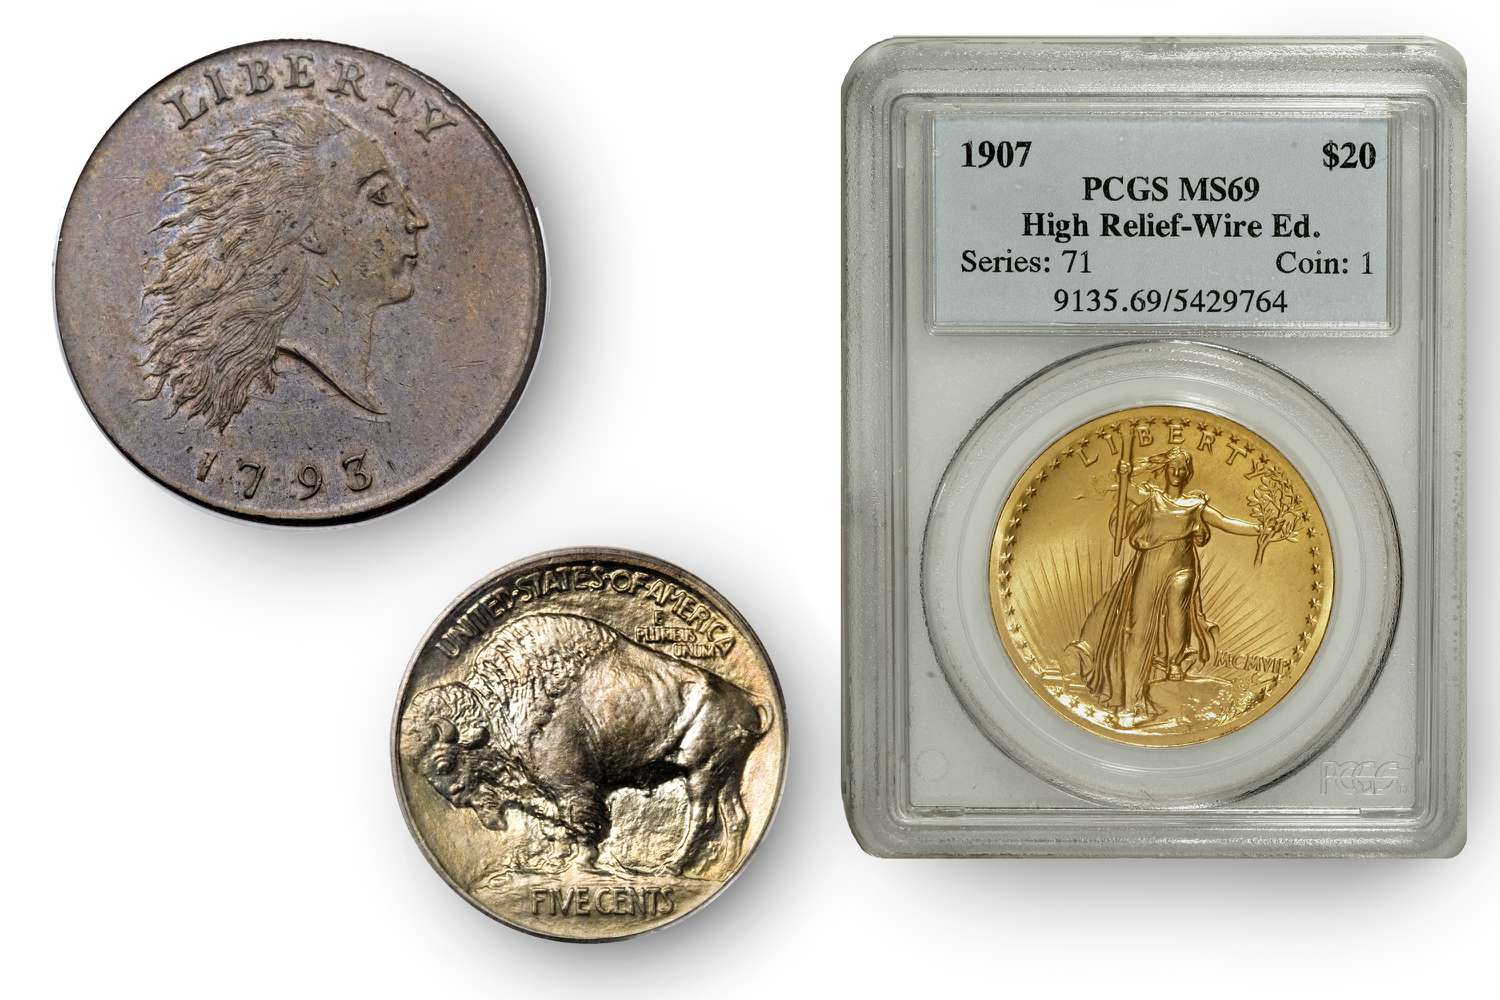 Are Collectible Coins a Good Investment? - Hero Bullion